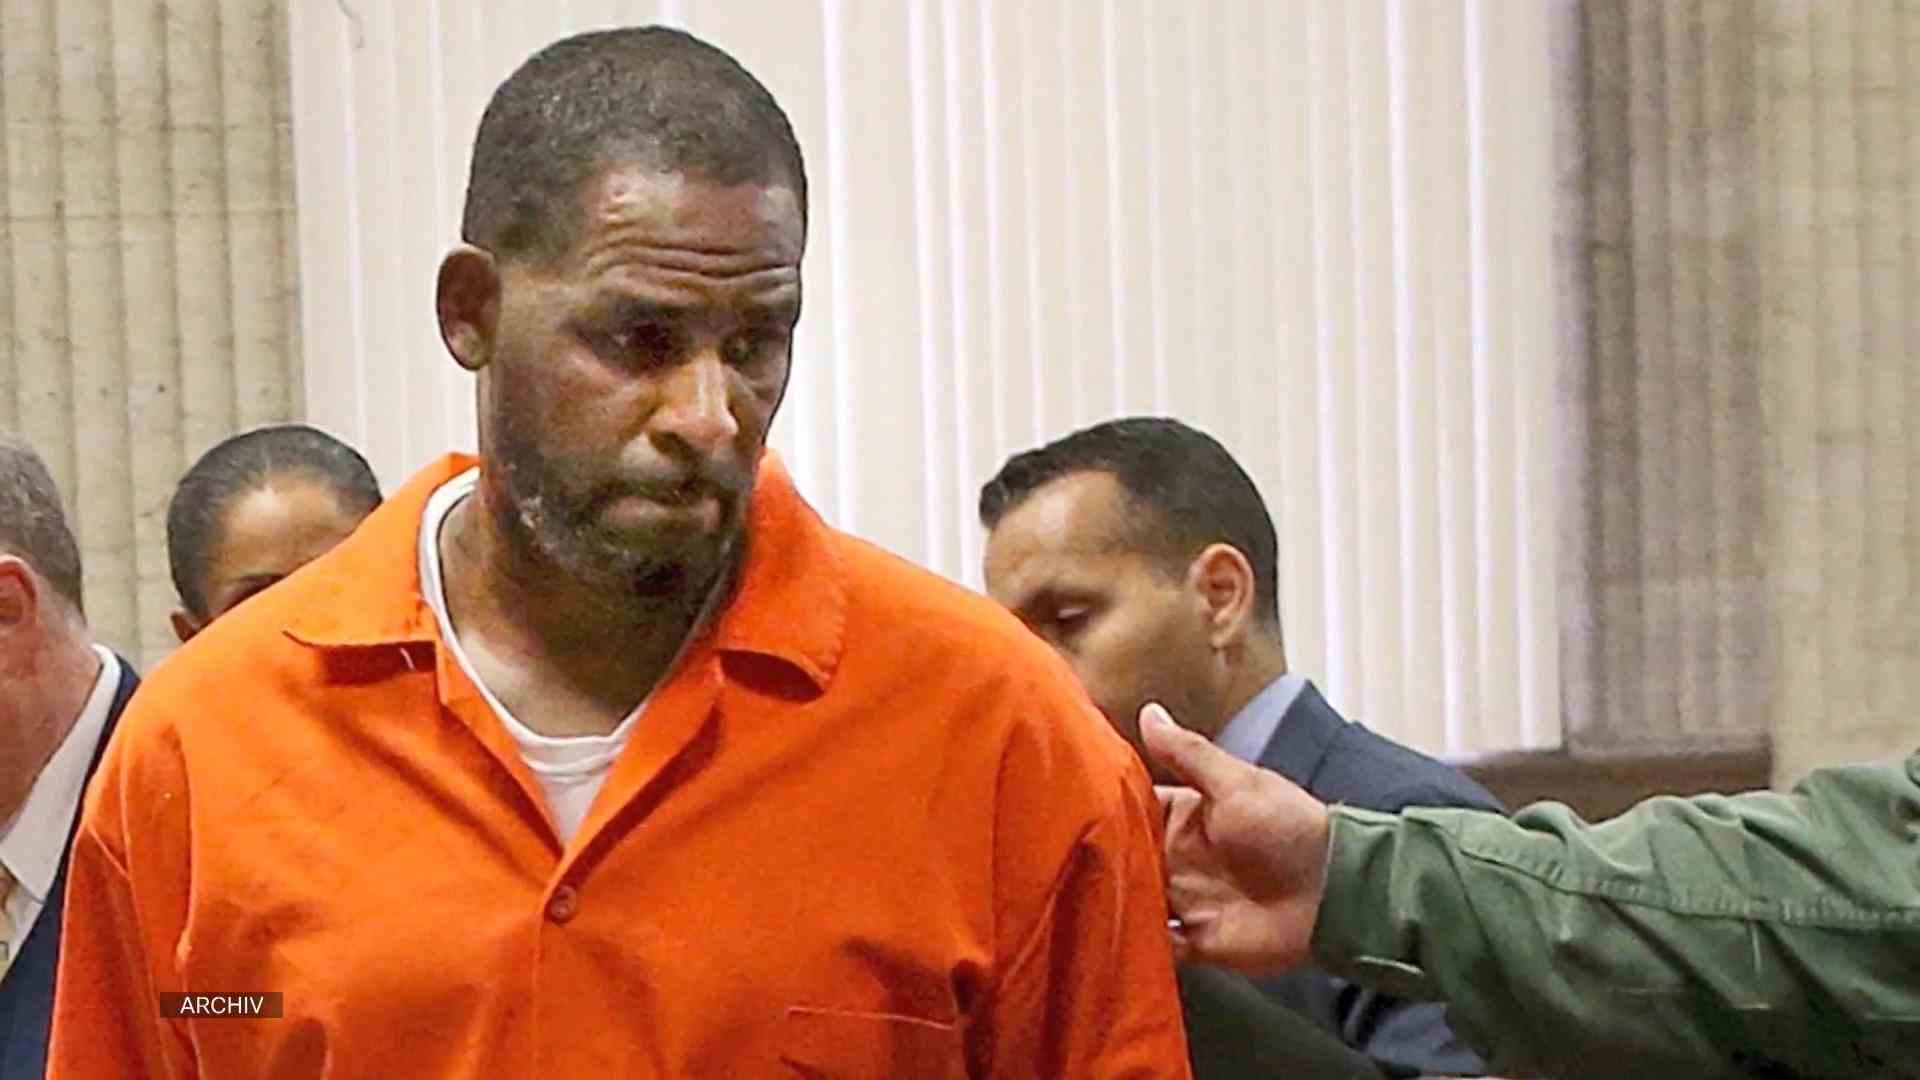 R. Kelly sentenced again for child pornography He faces more years in prison